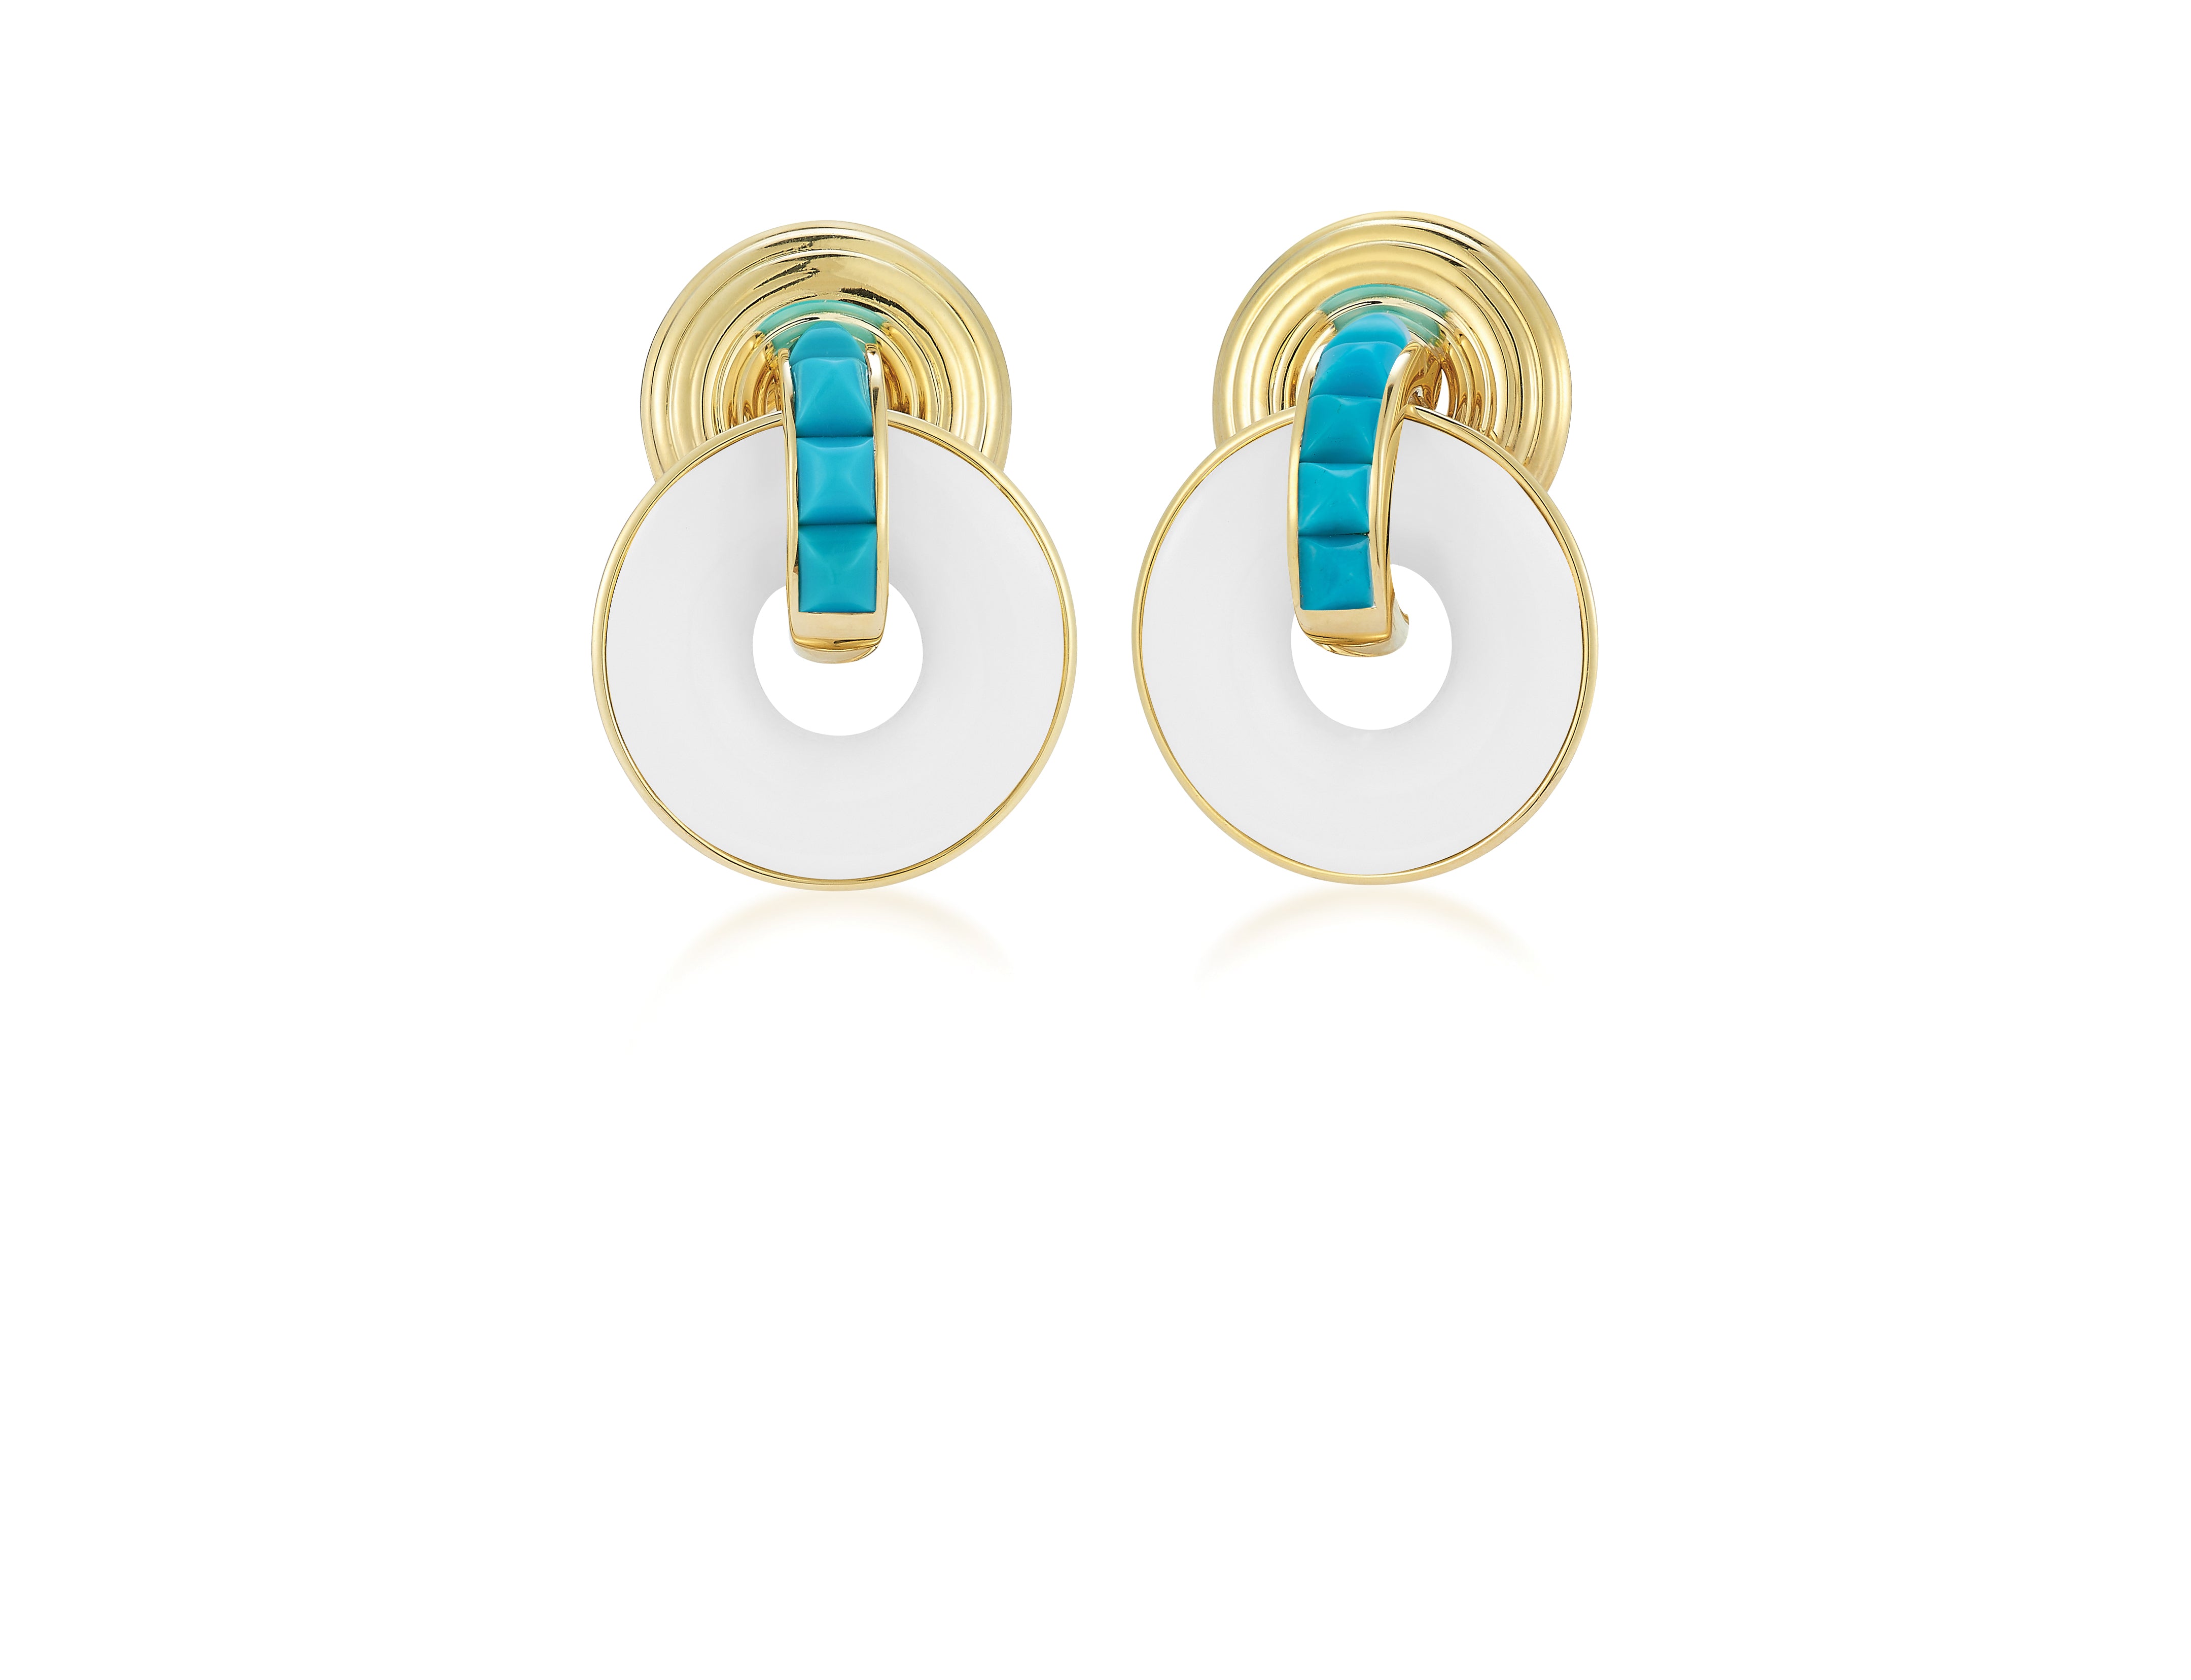 Double Giro Earrings in Turquoise and White Cermaic